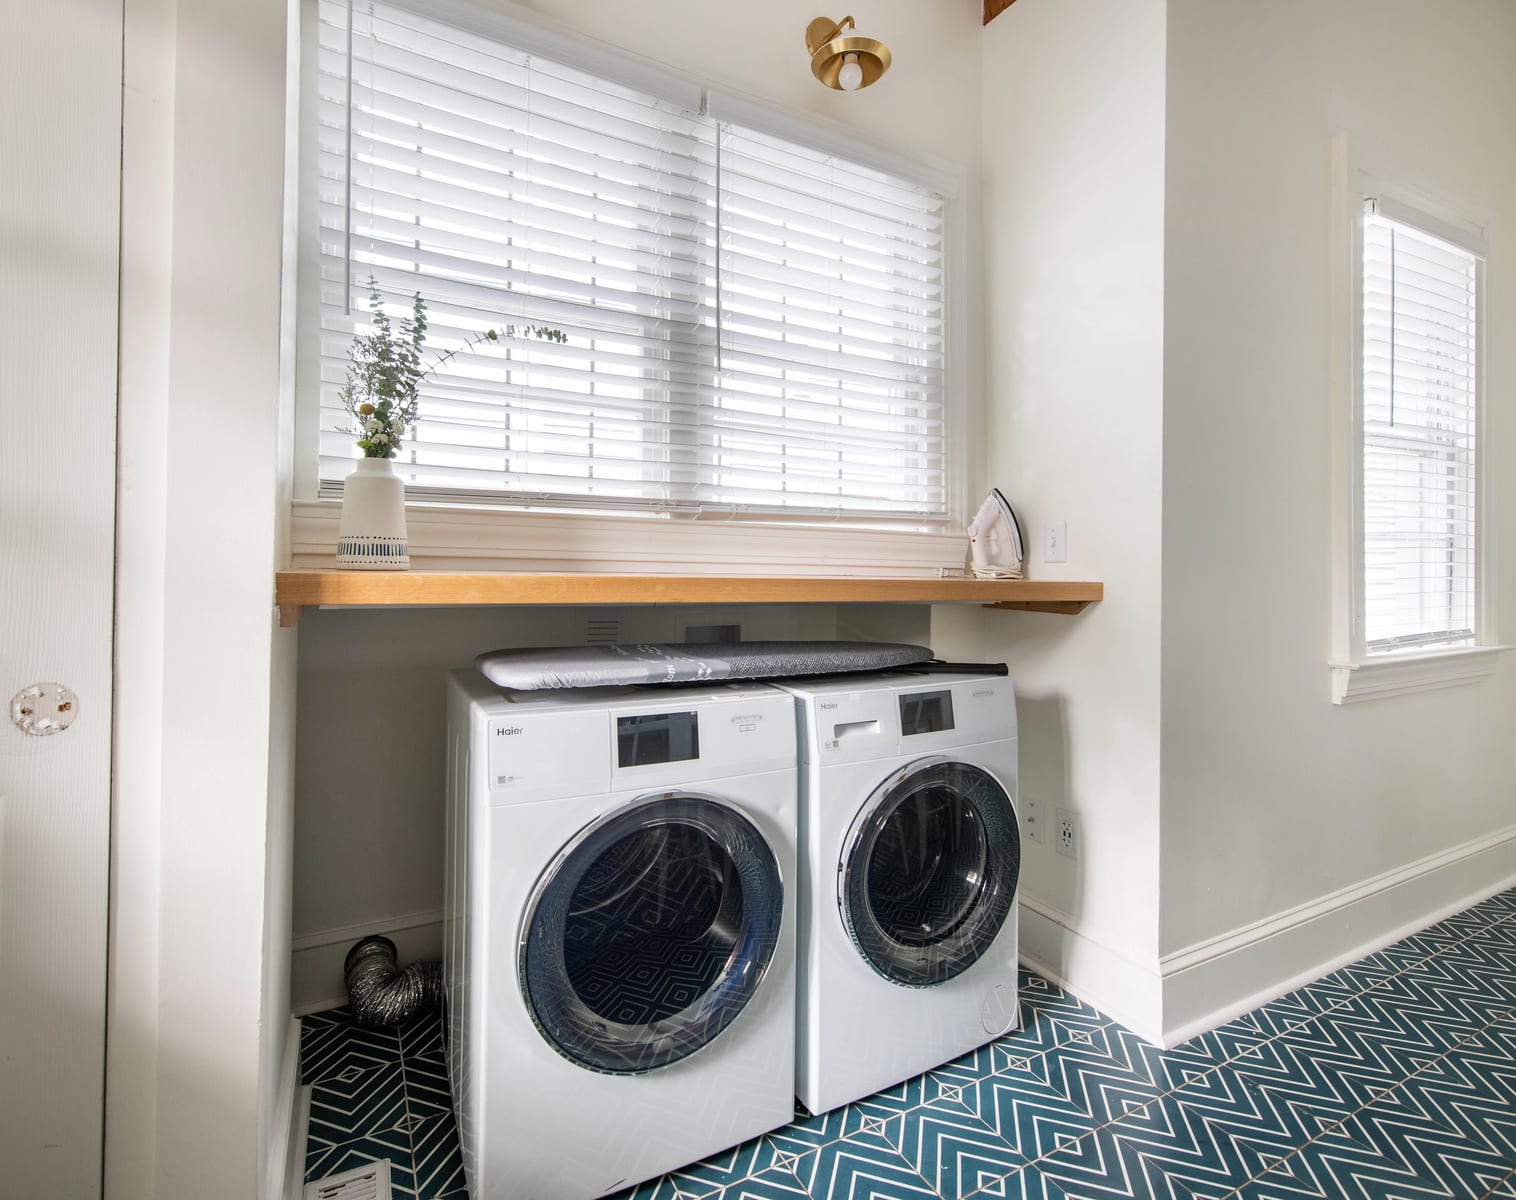 Laundry + dryer for your use!